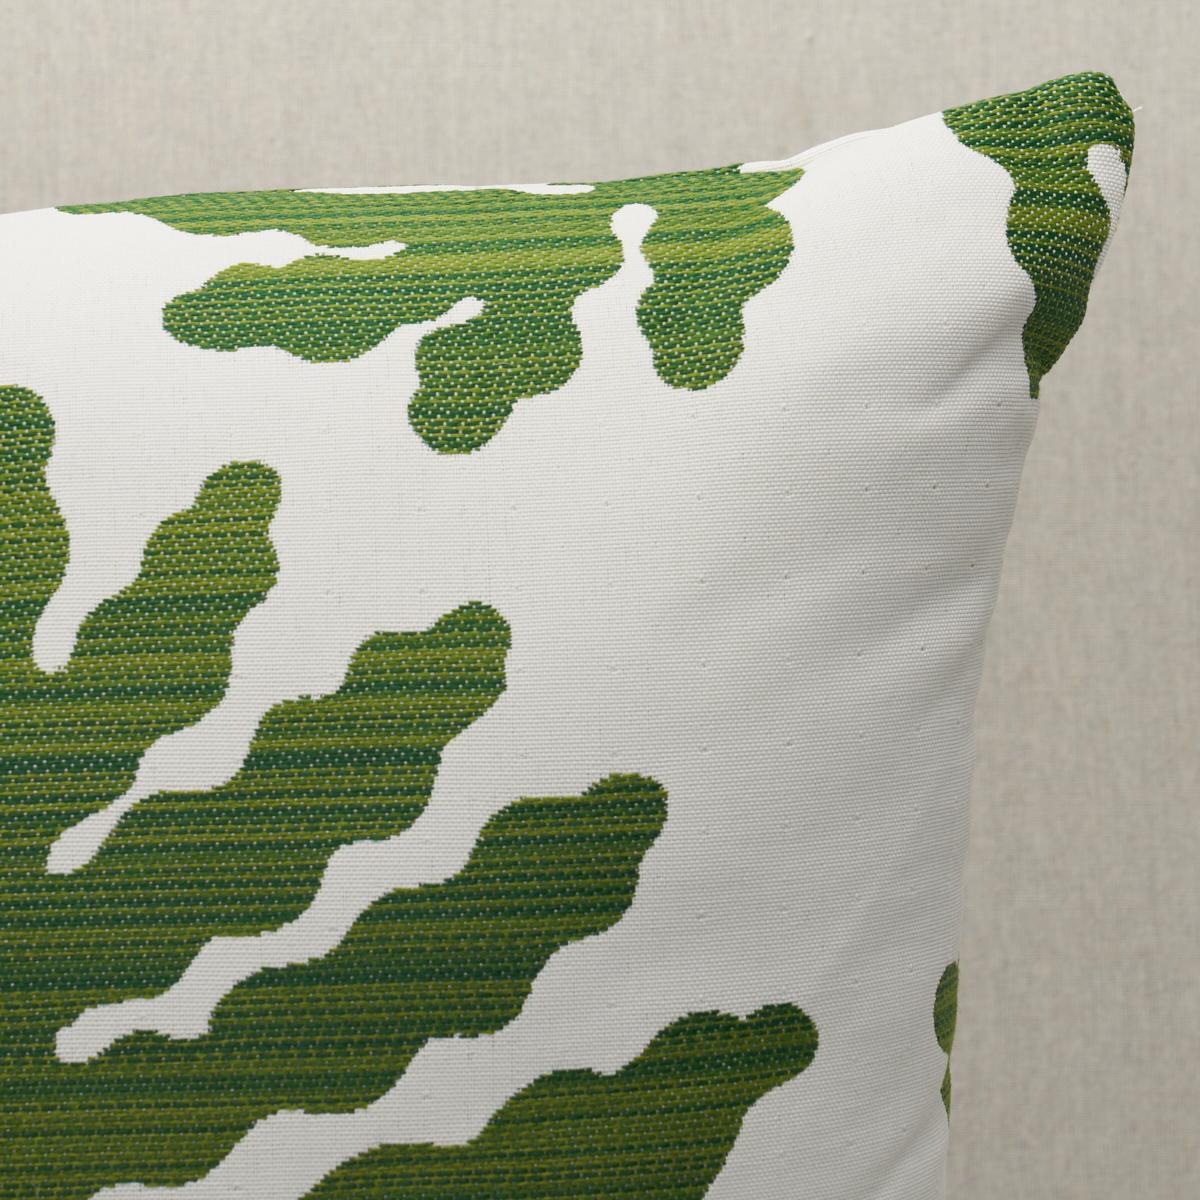 This pillow features Palma Sola Indoor/Outdoor with a knife edge finish. With its wavy mid-scale leaf motif and delicate strié effect, Palma Sola Indoor/Outdoor in green is a high-performance pocket-weave fabric that is equally at home inside and